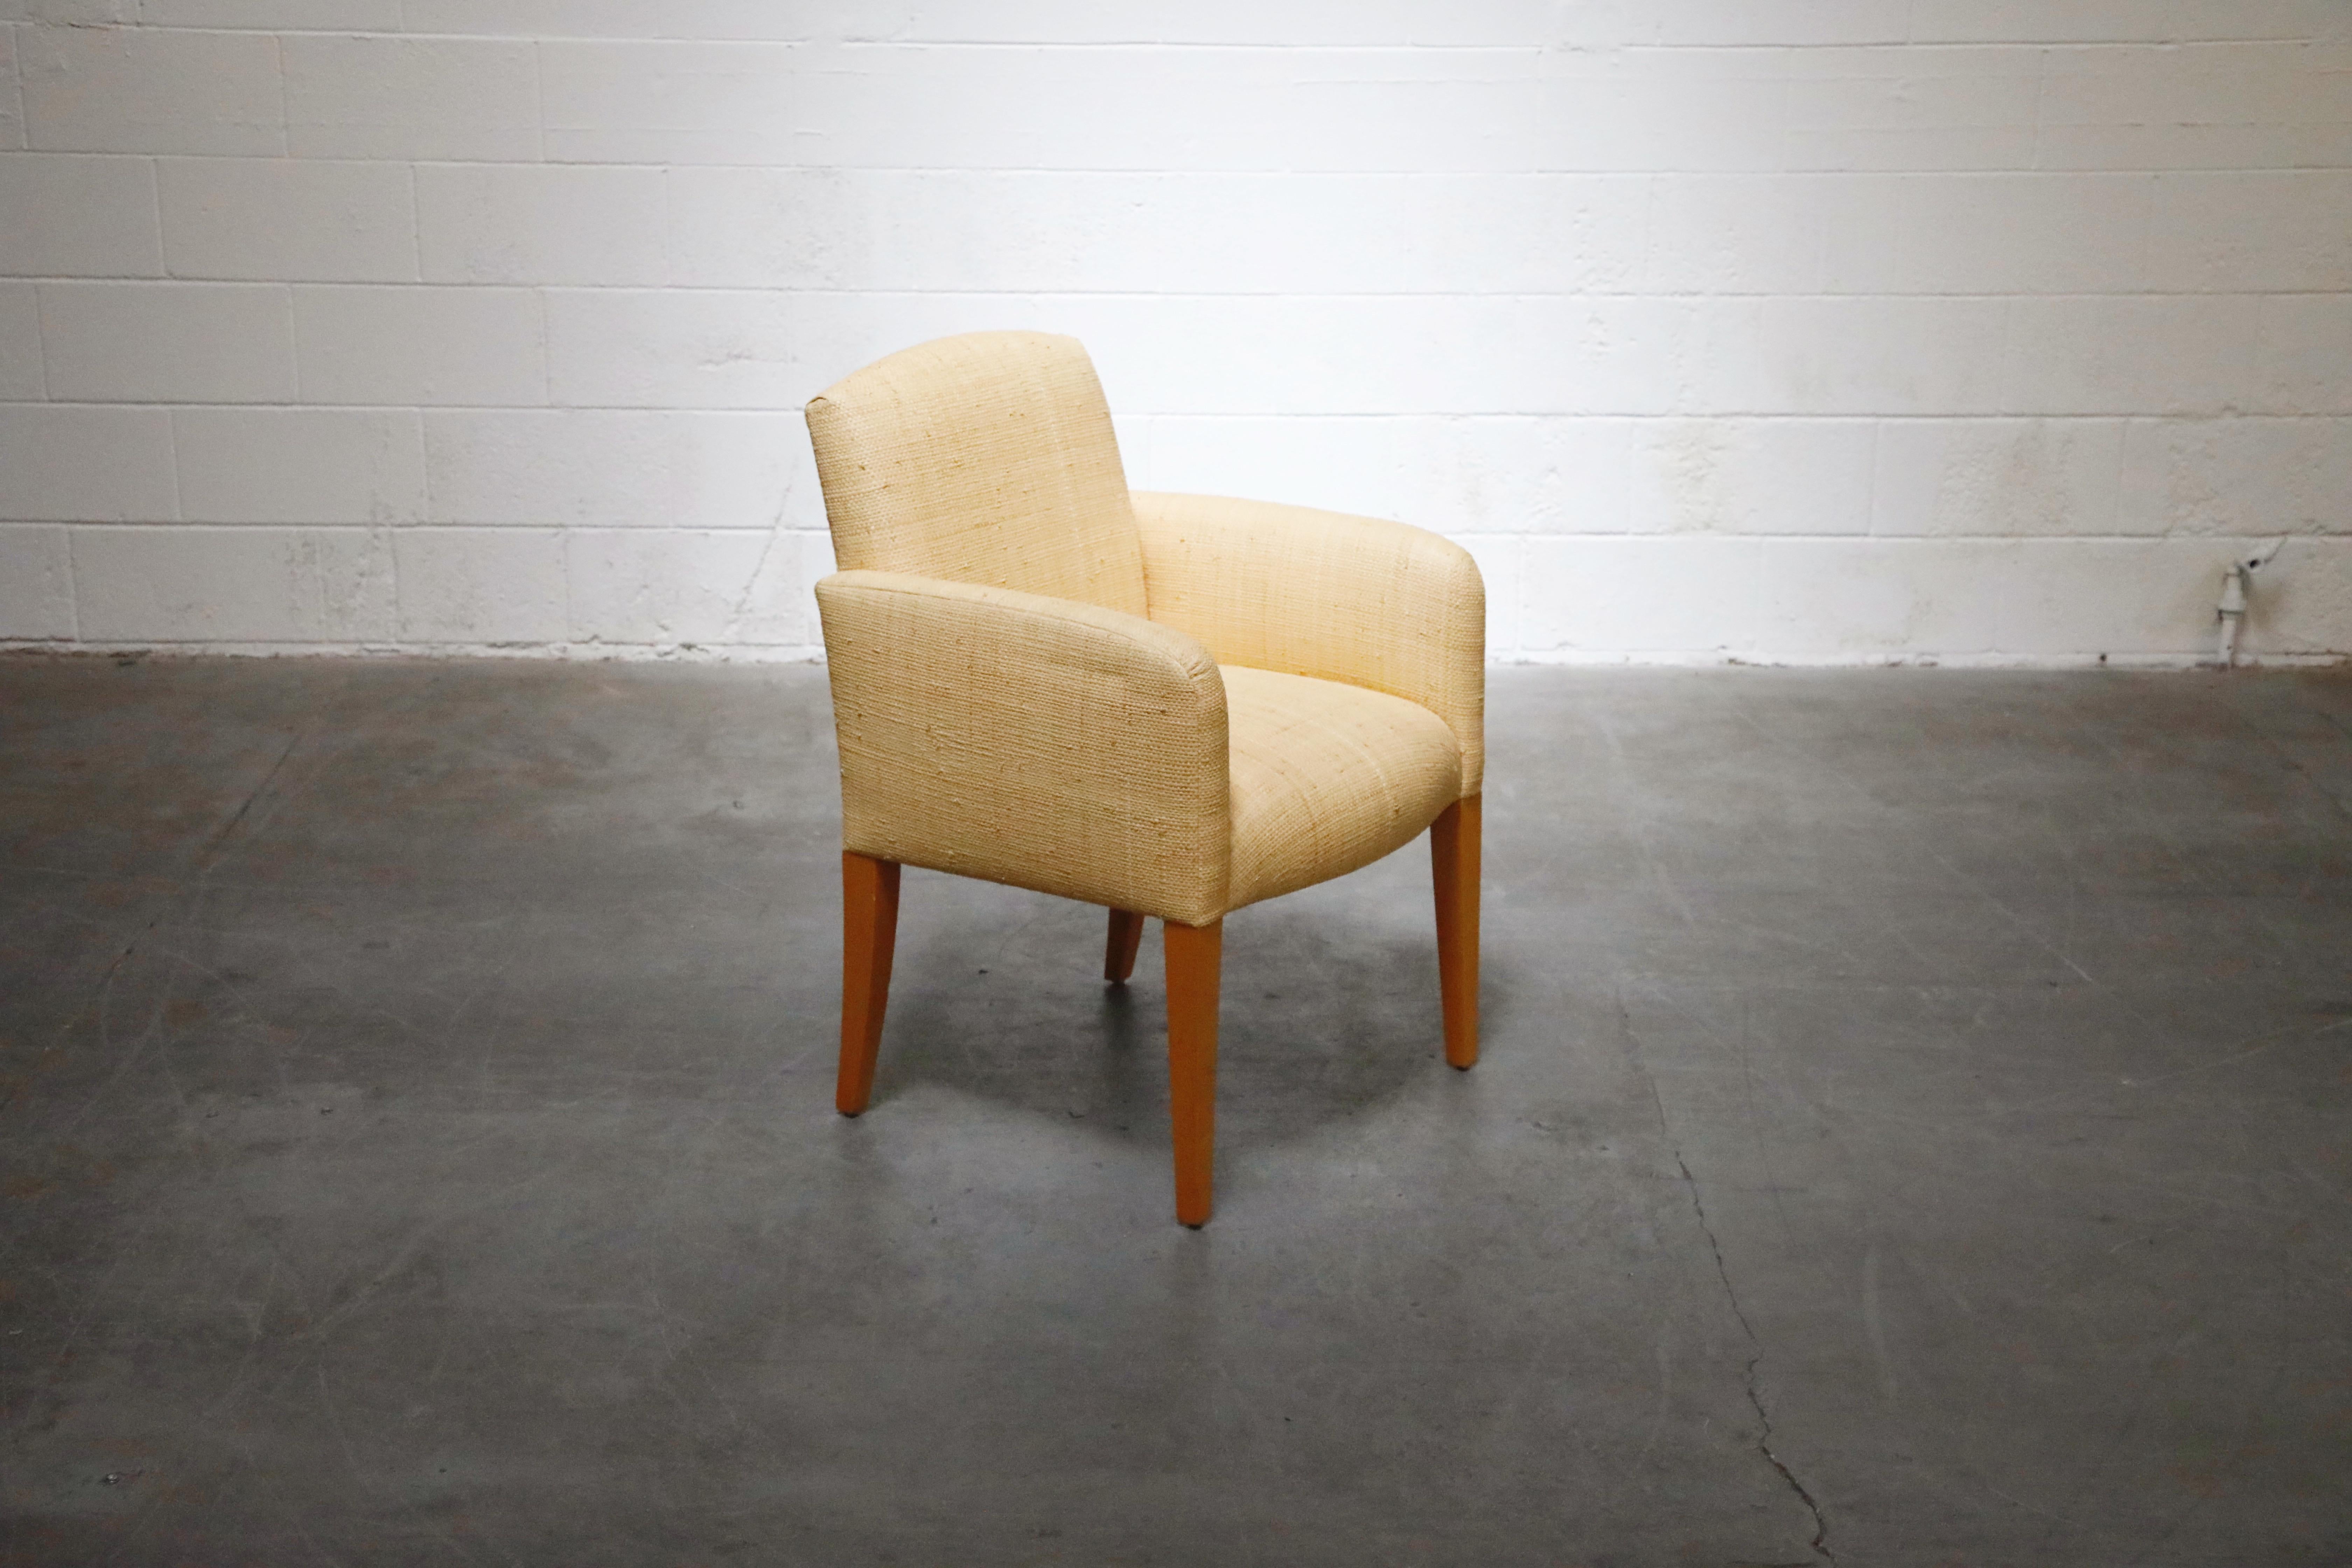 American Donghia Custom Ordered Woven Grasscloth 'Plaza' Armchair, 1992